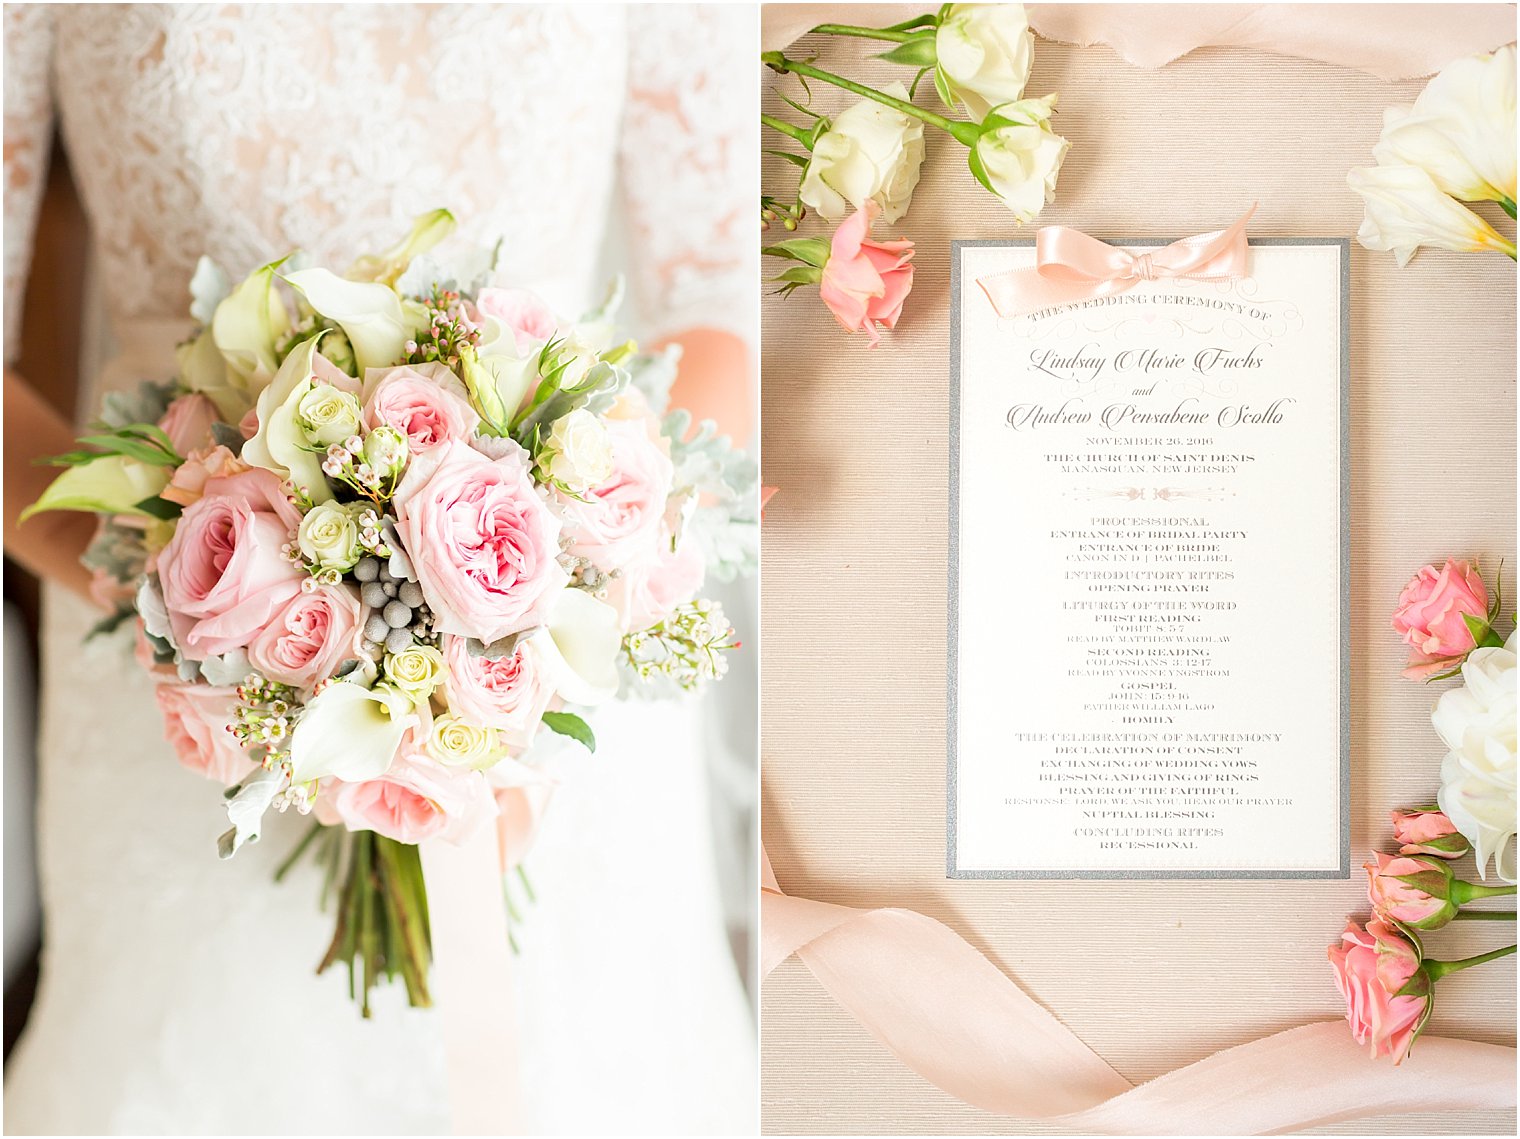 Wedding bouquet by Bogath Weddings and Events | Invitation by Holland Designs